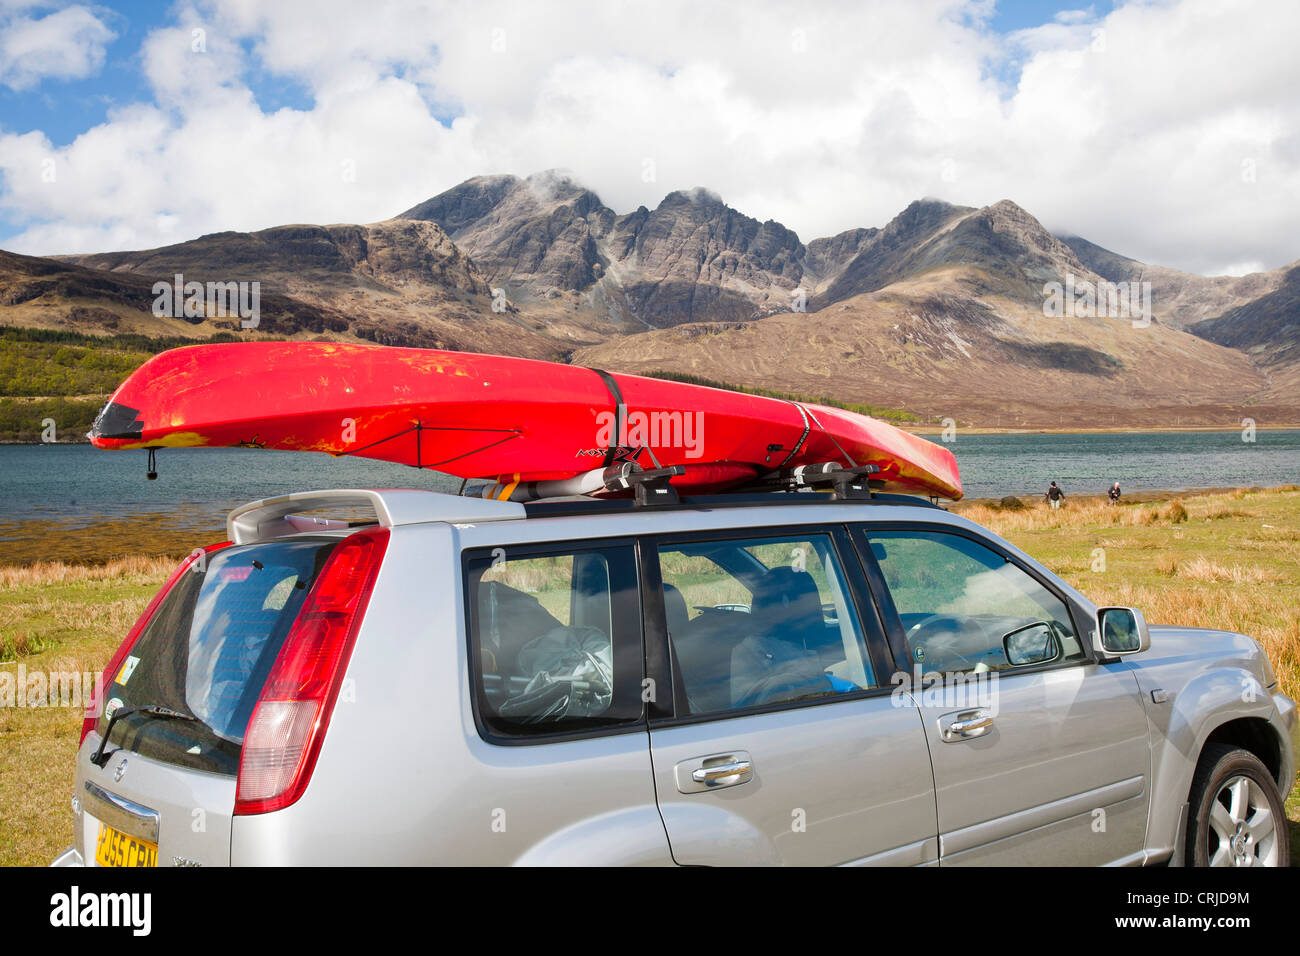 Blaven an outlier of the Cuillin Ridge on the Isle of Skye, Scotland, UK, from Torrin, with a car and canoe by Loch Slappin. Stock Photo